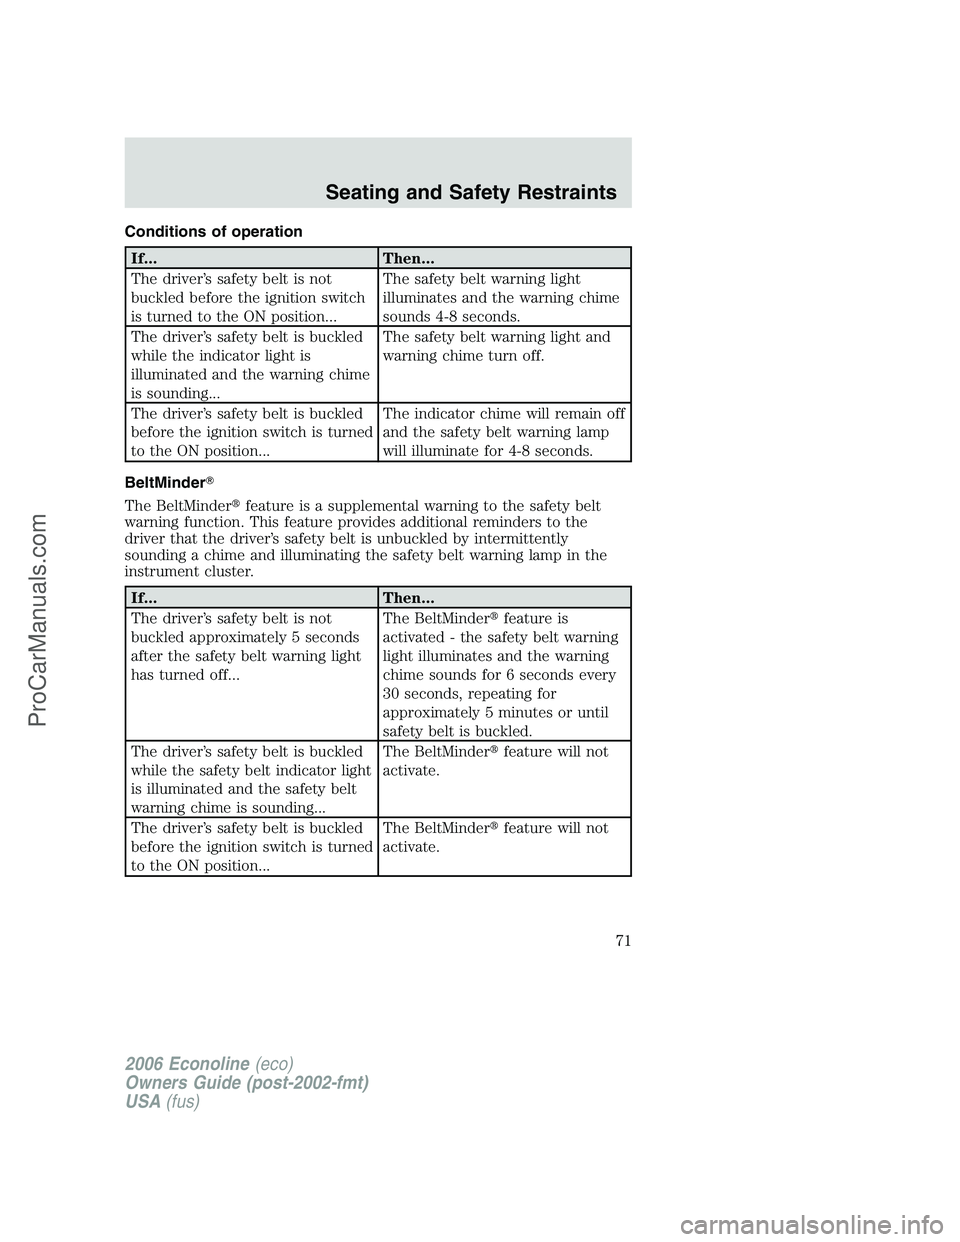 FORD E-150 2006 Manual PDF Conditions of operation
If... Then...
The driver’s safety belt is not
buckled before the ignition switch
is turned to the ON position...The safety belt warning light
illuminates and the warning chim